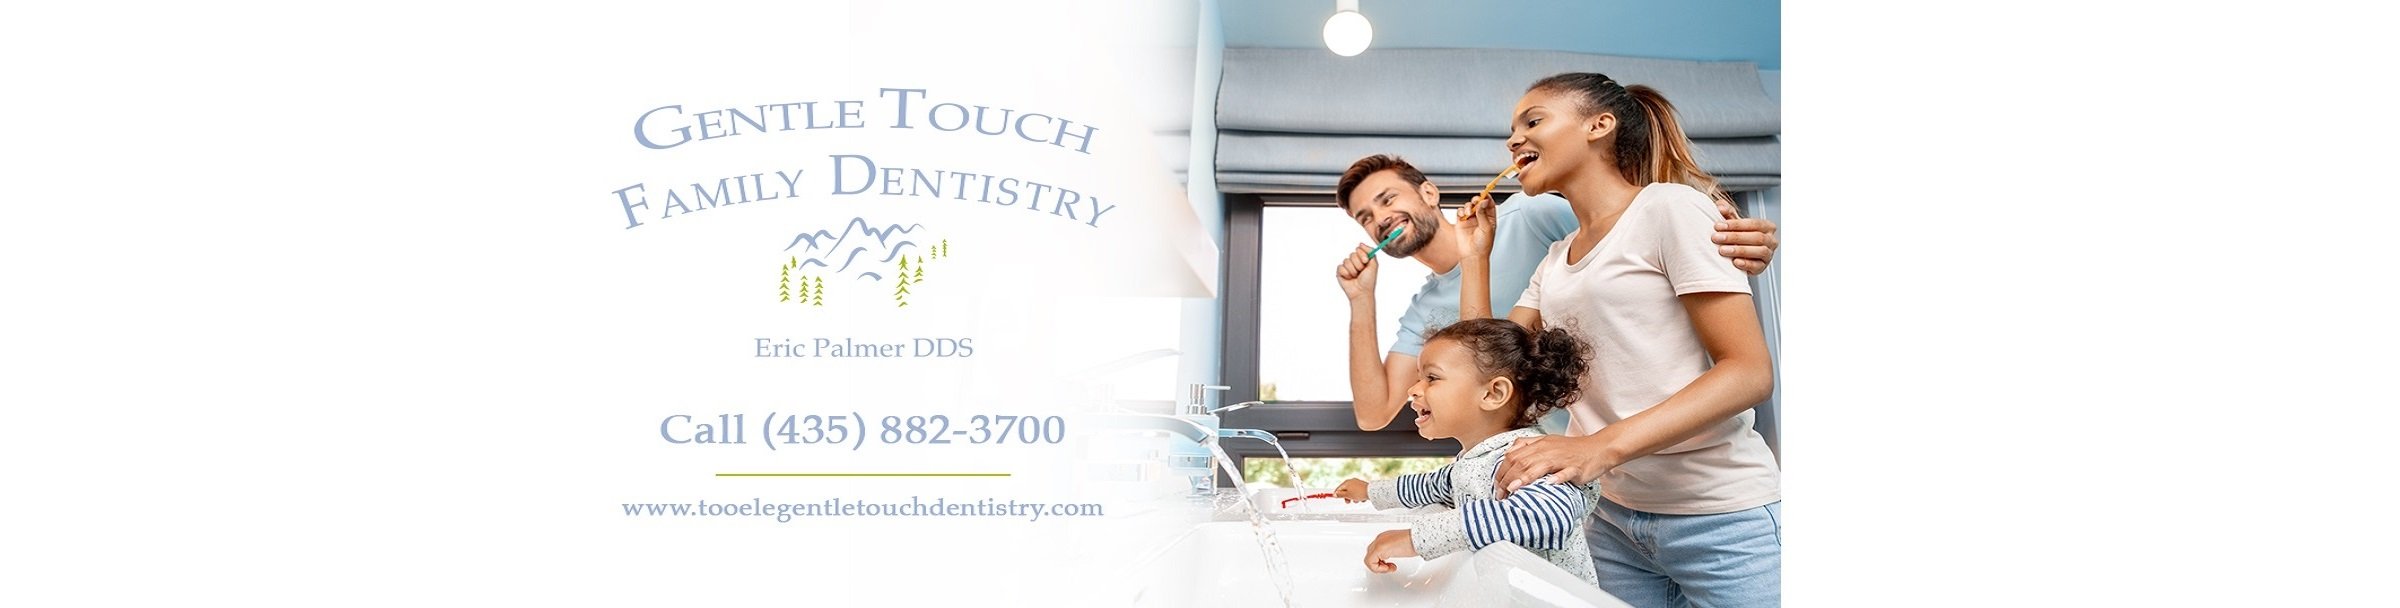 Gentle Touch Family Dentistry cover